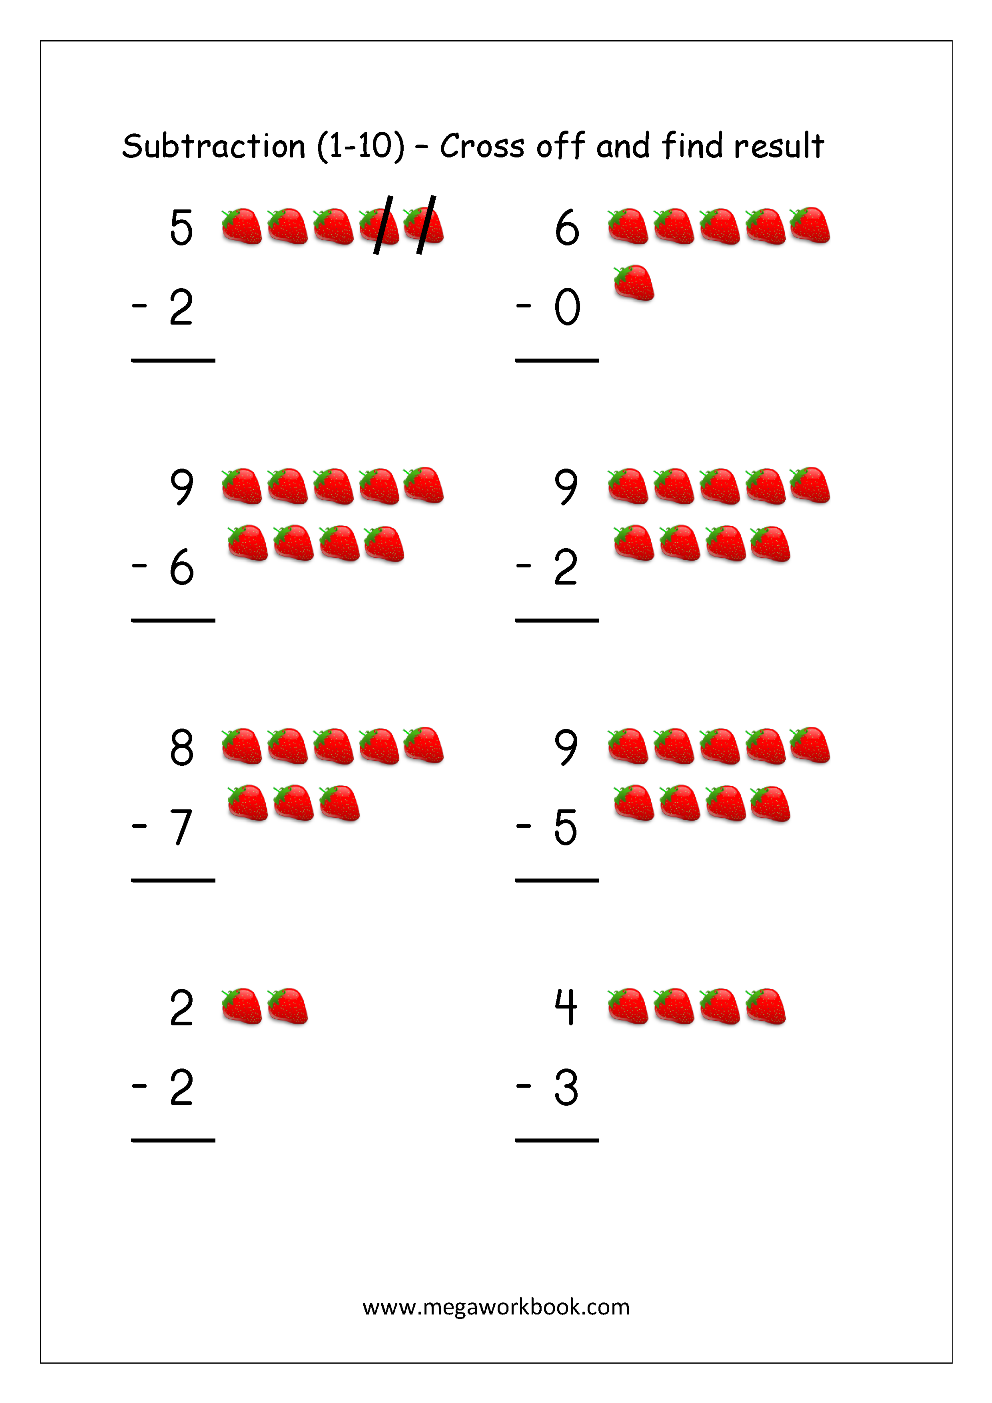 Subtraction Worksheets Subtraction With Pictures Objects Tally Marks To Cross Out